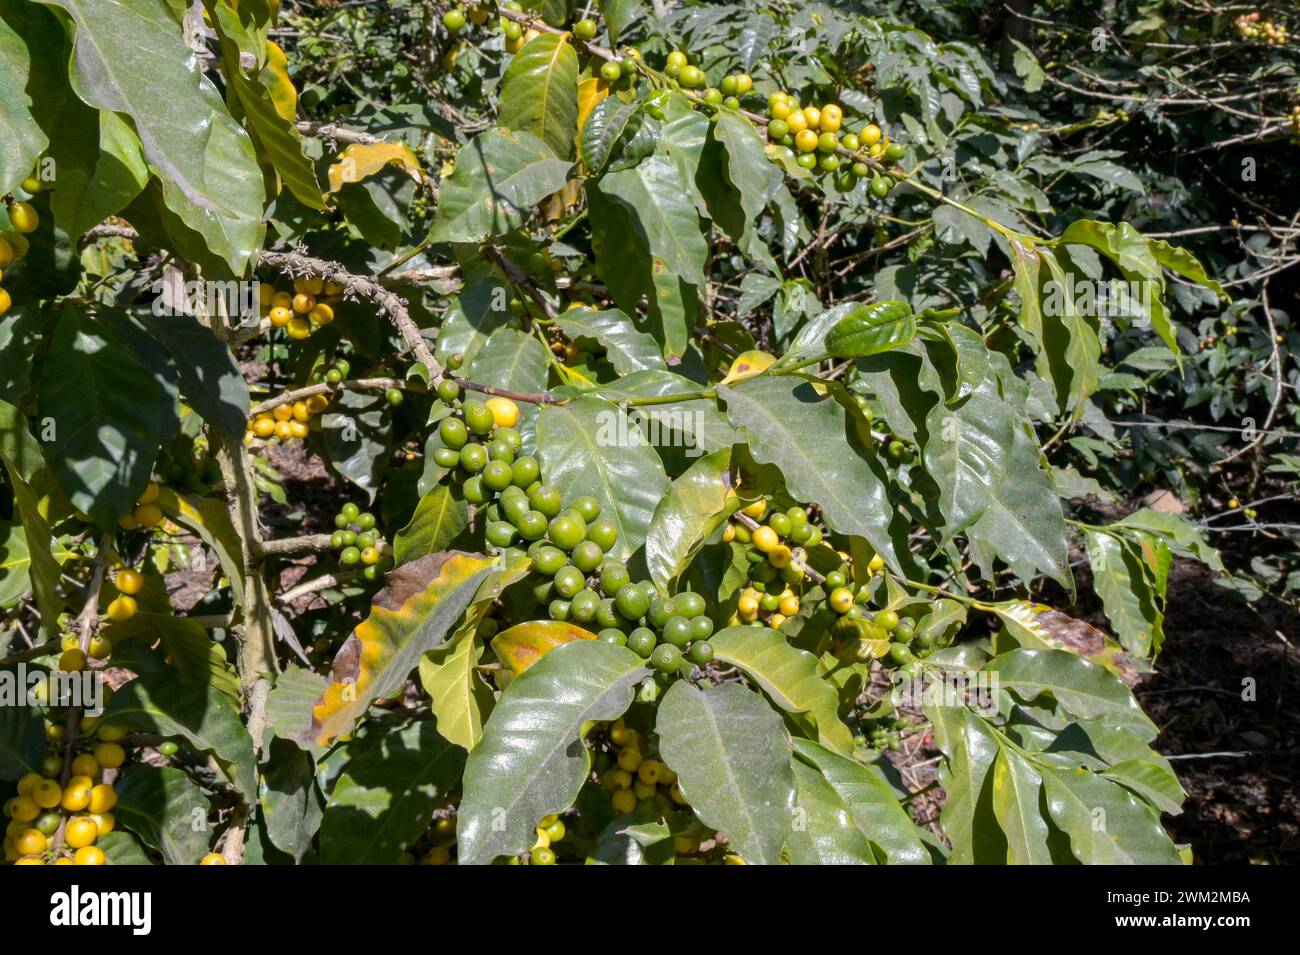 Green coffee beans ripening on a plant with ripe yellow beans on some branches Stock Photo